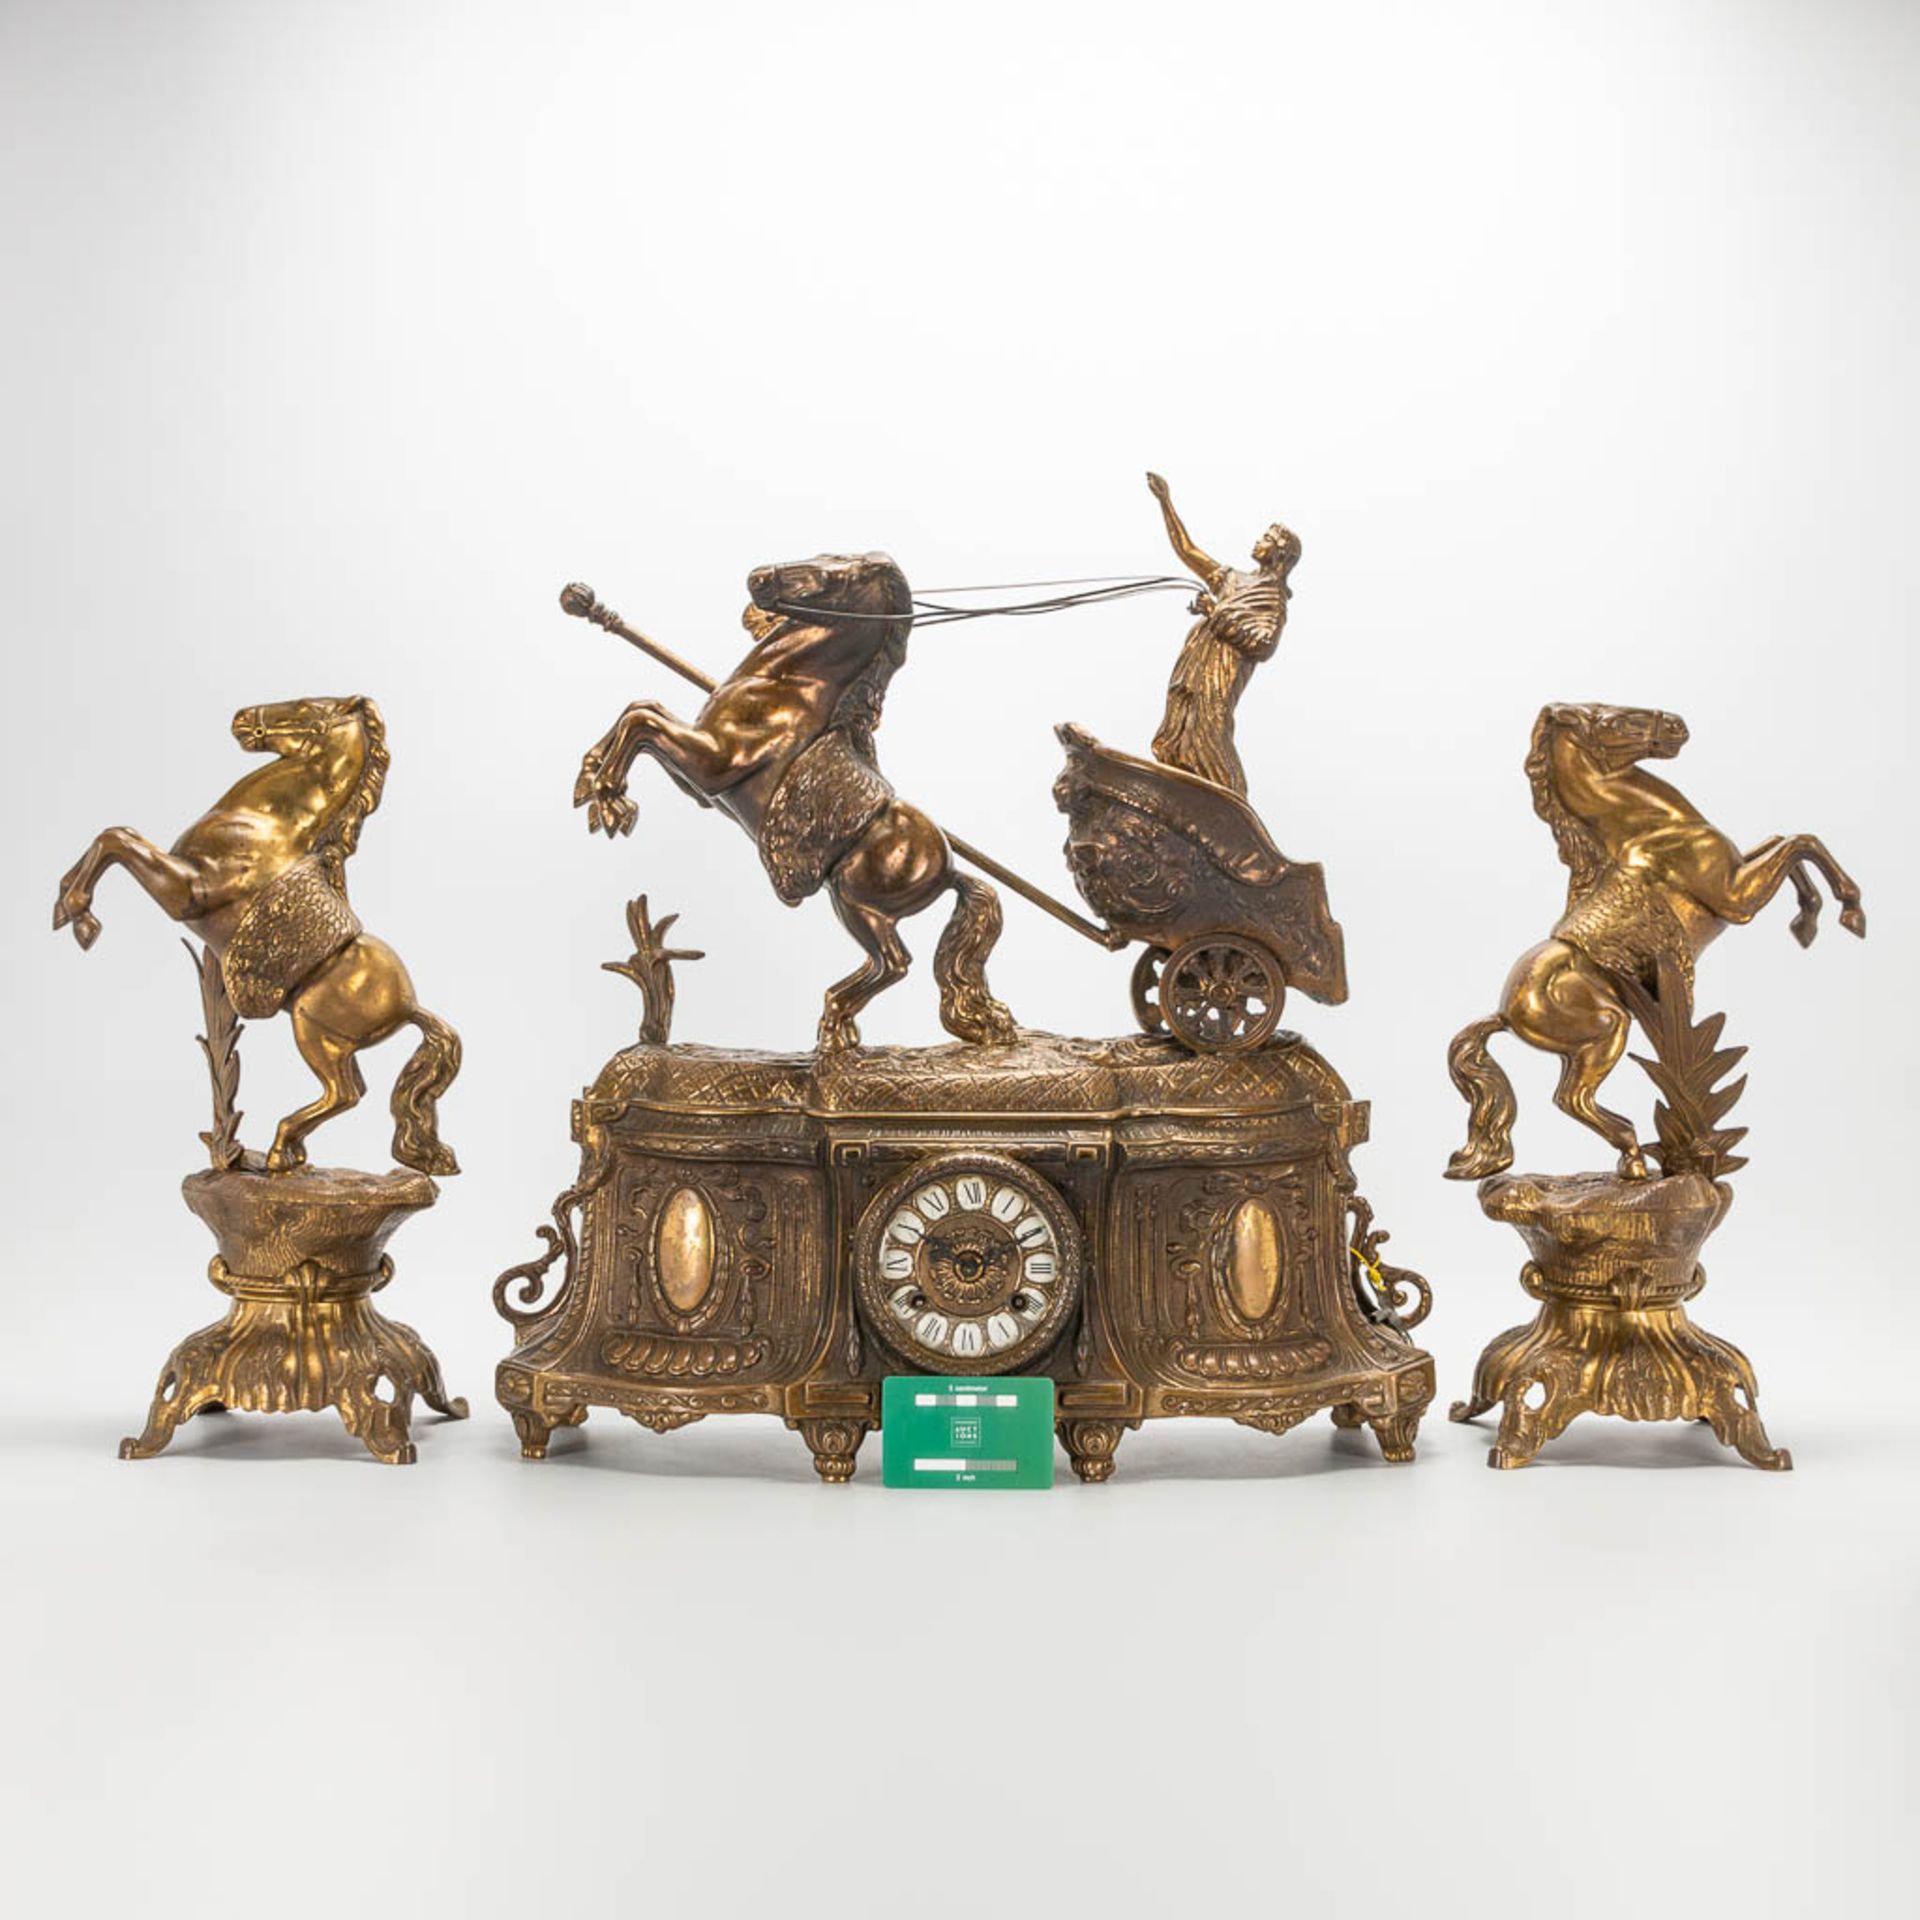 A 3 piece garniture clockset made of bronze, consisting of a clock with battle cart and 2 side piece - Image 2 of 18